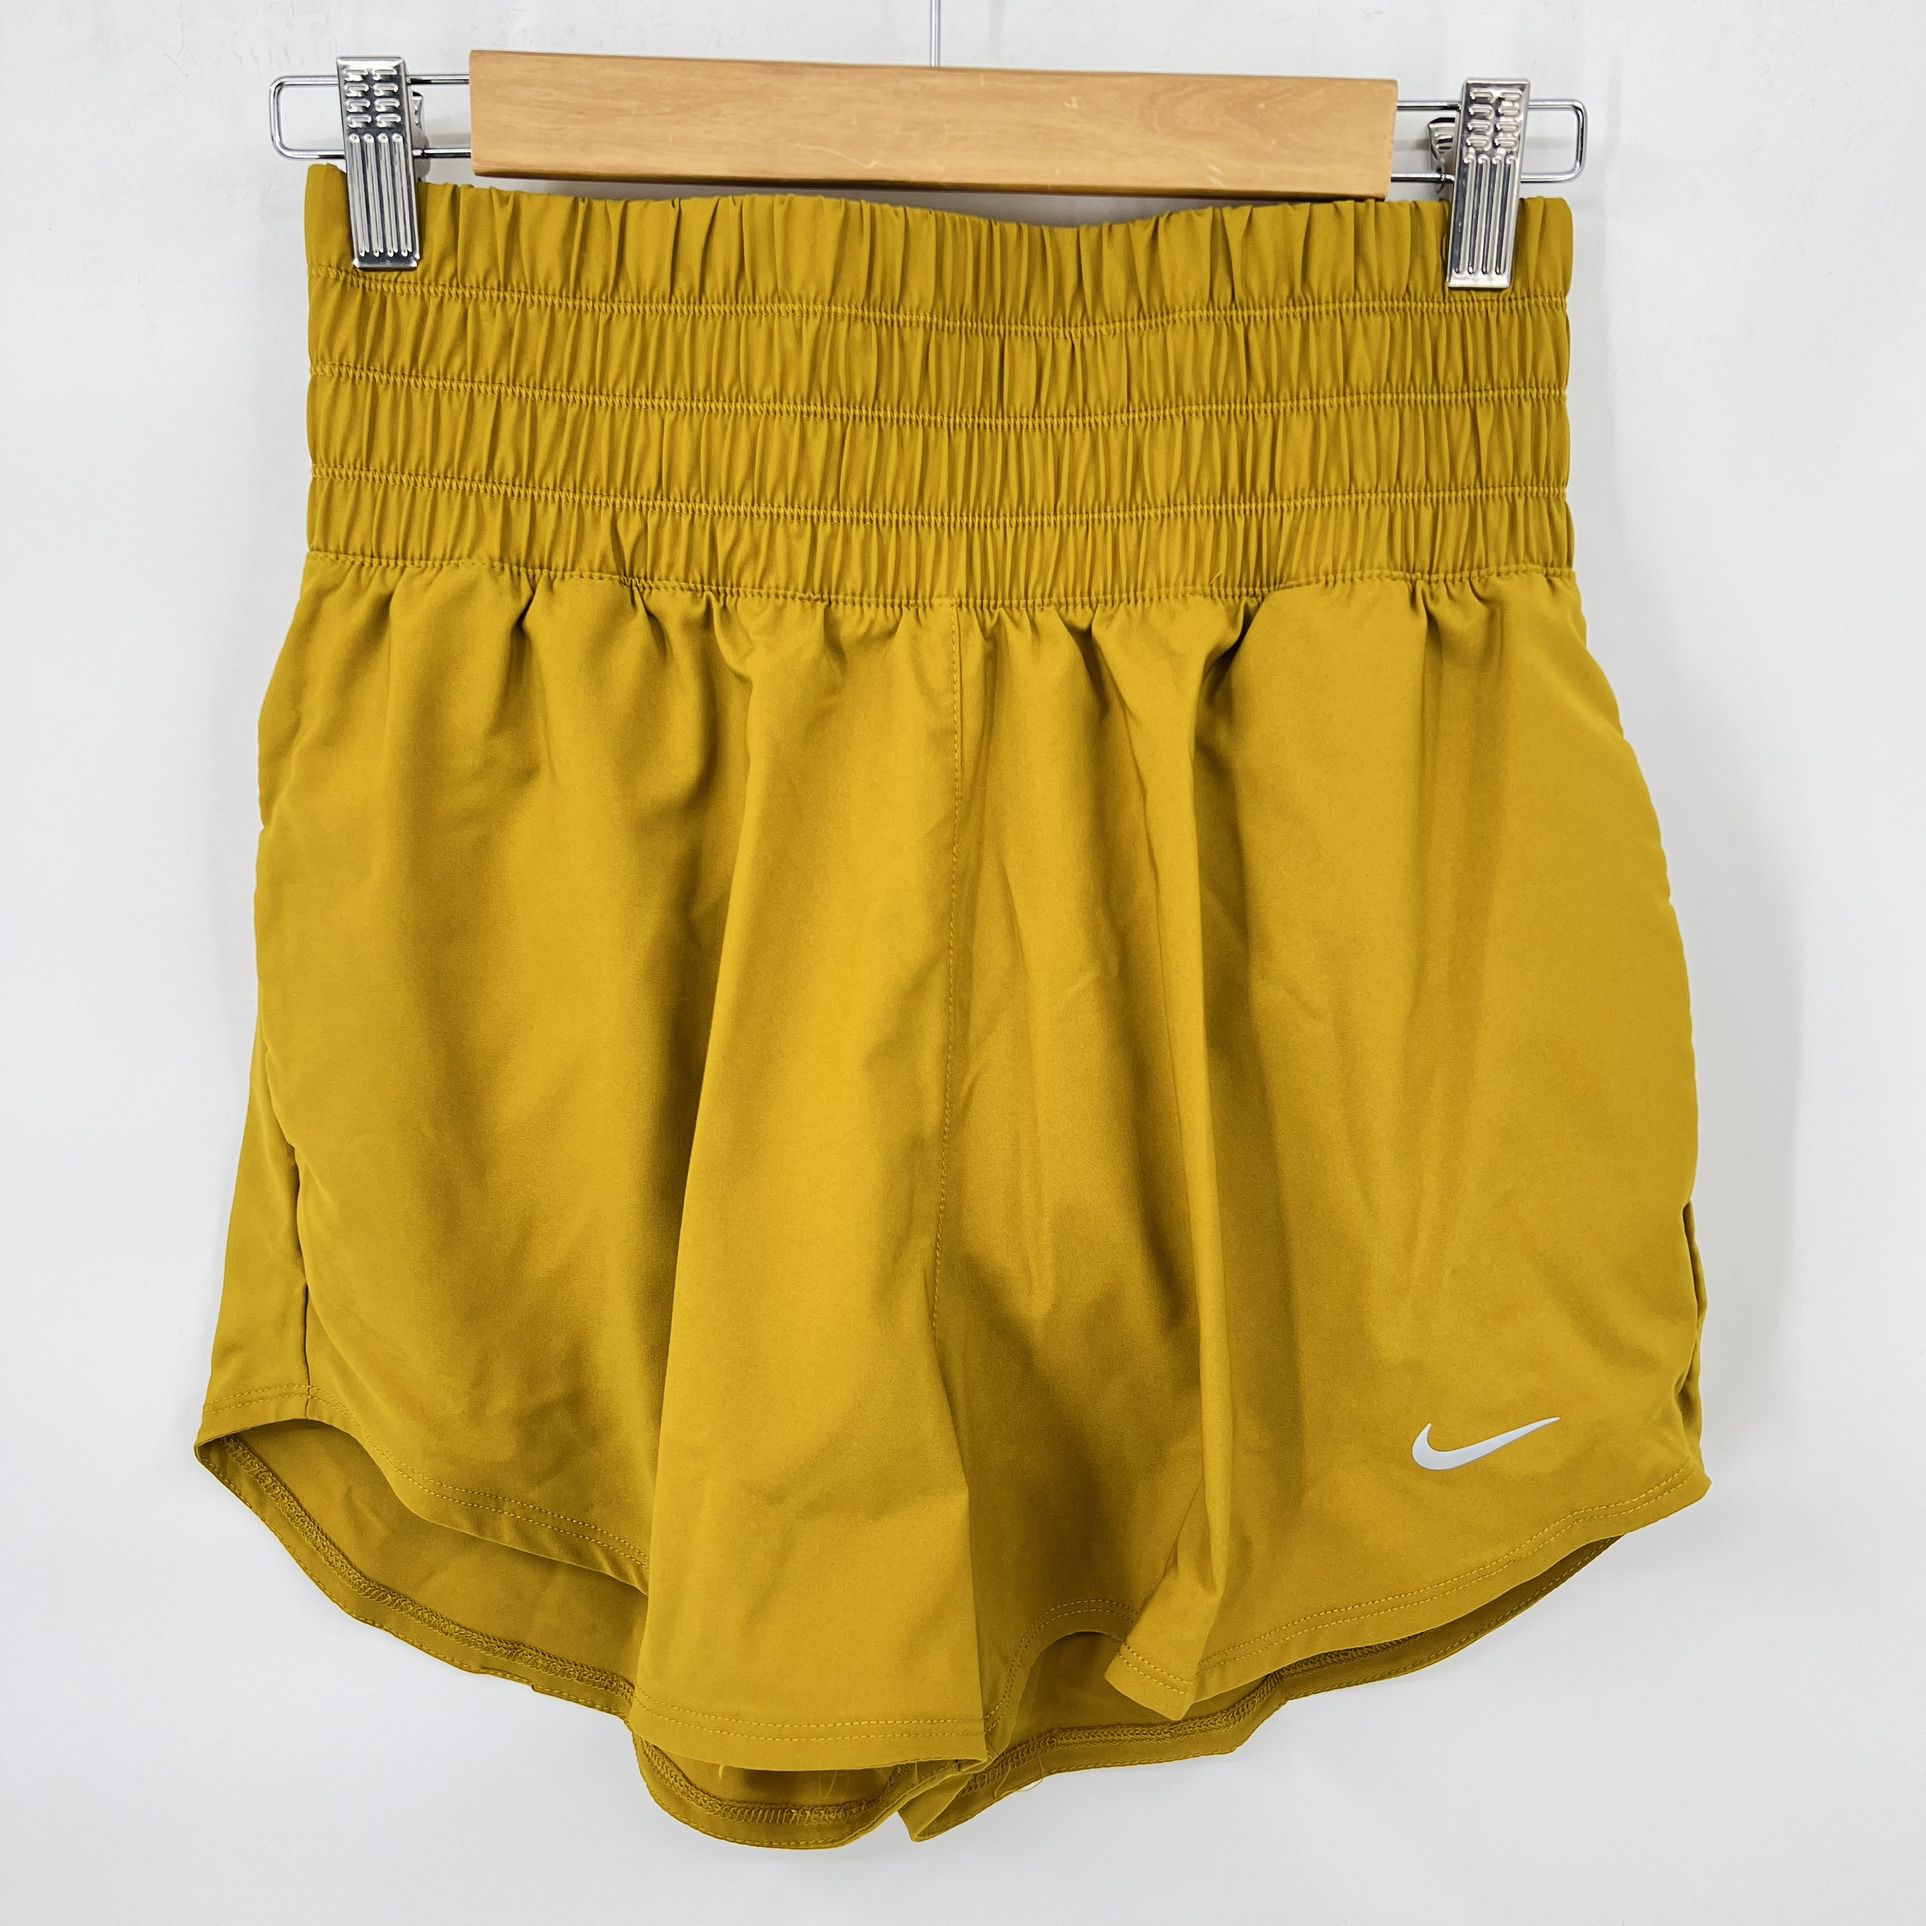 NEW $45 Nike High Rise Pull On Lined Mustard Yellow Athletic Shorts Size Small